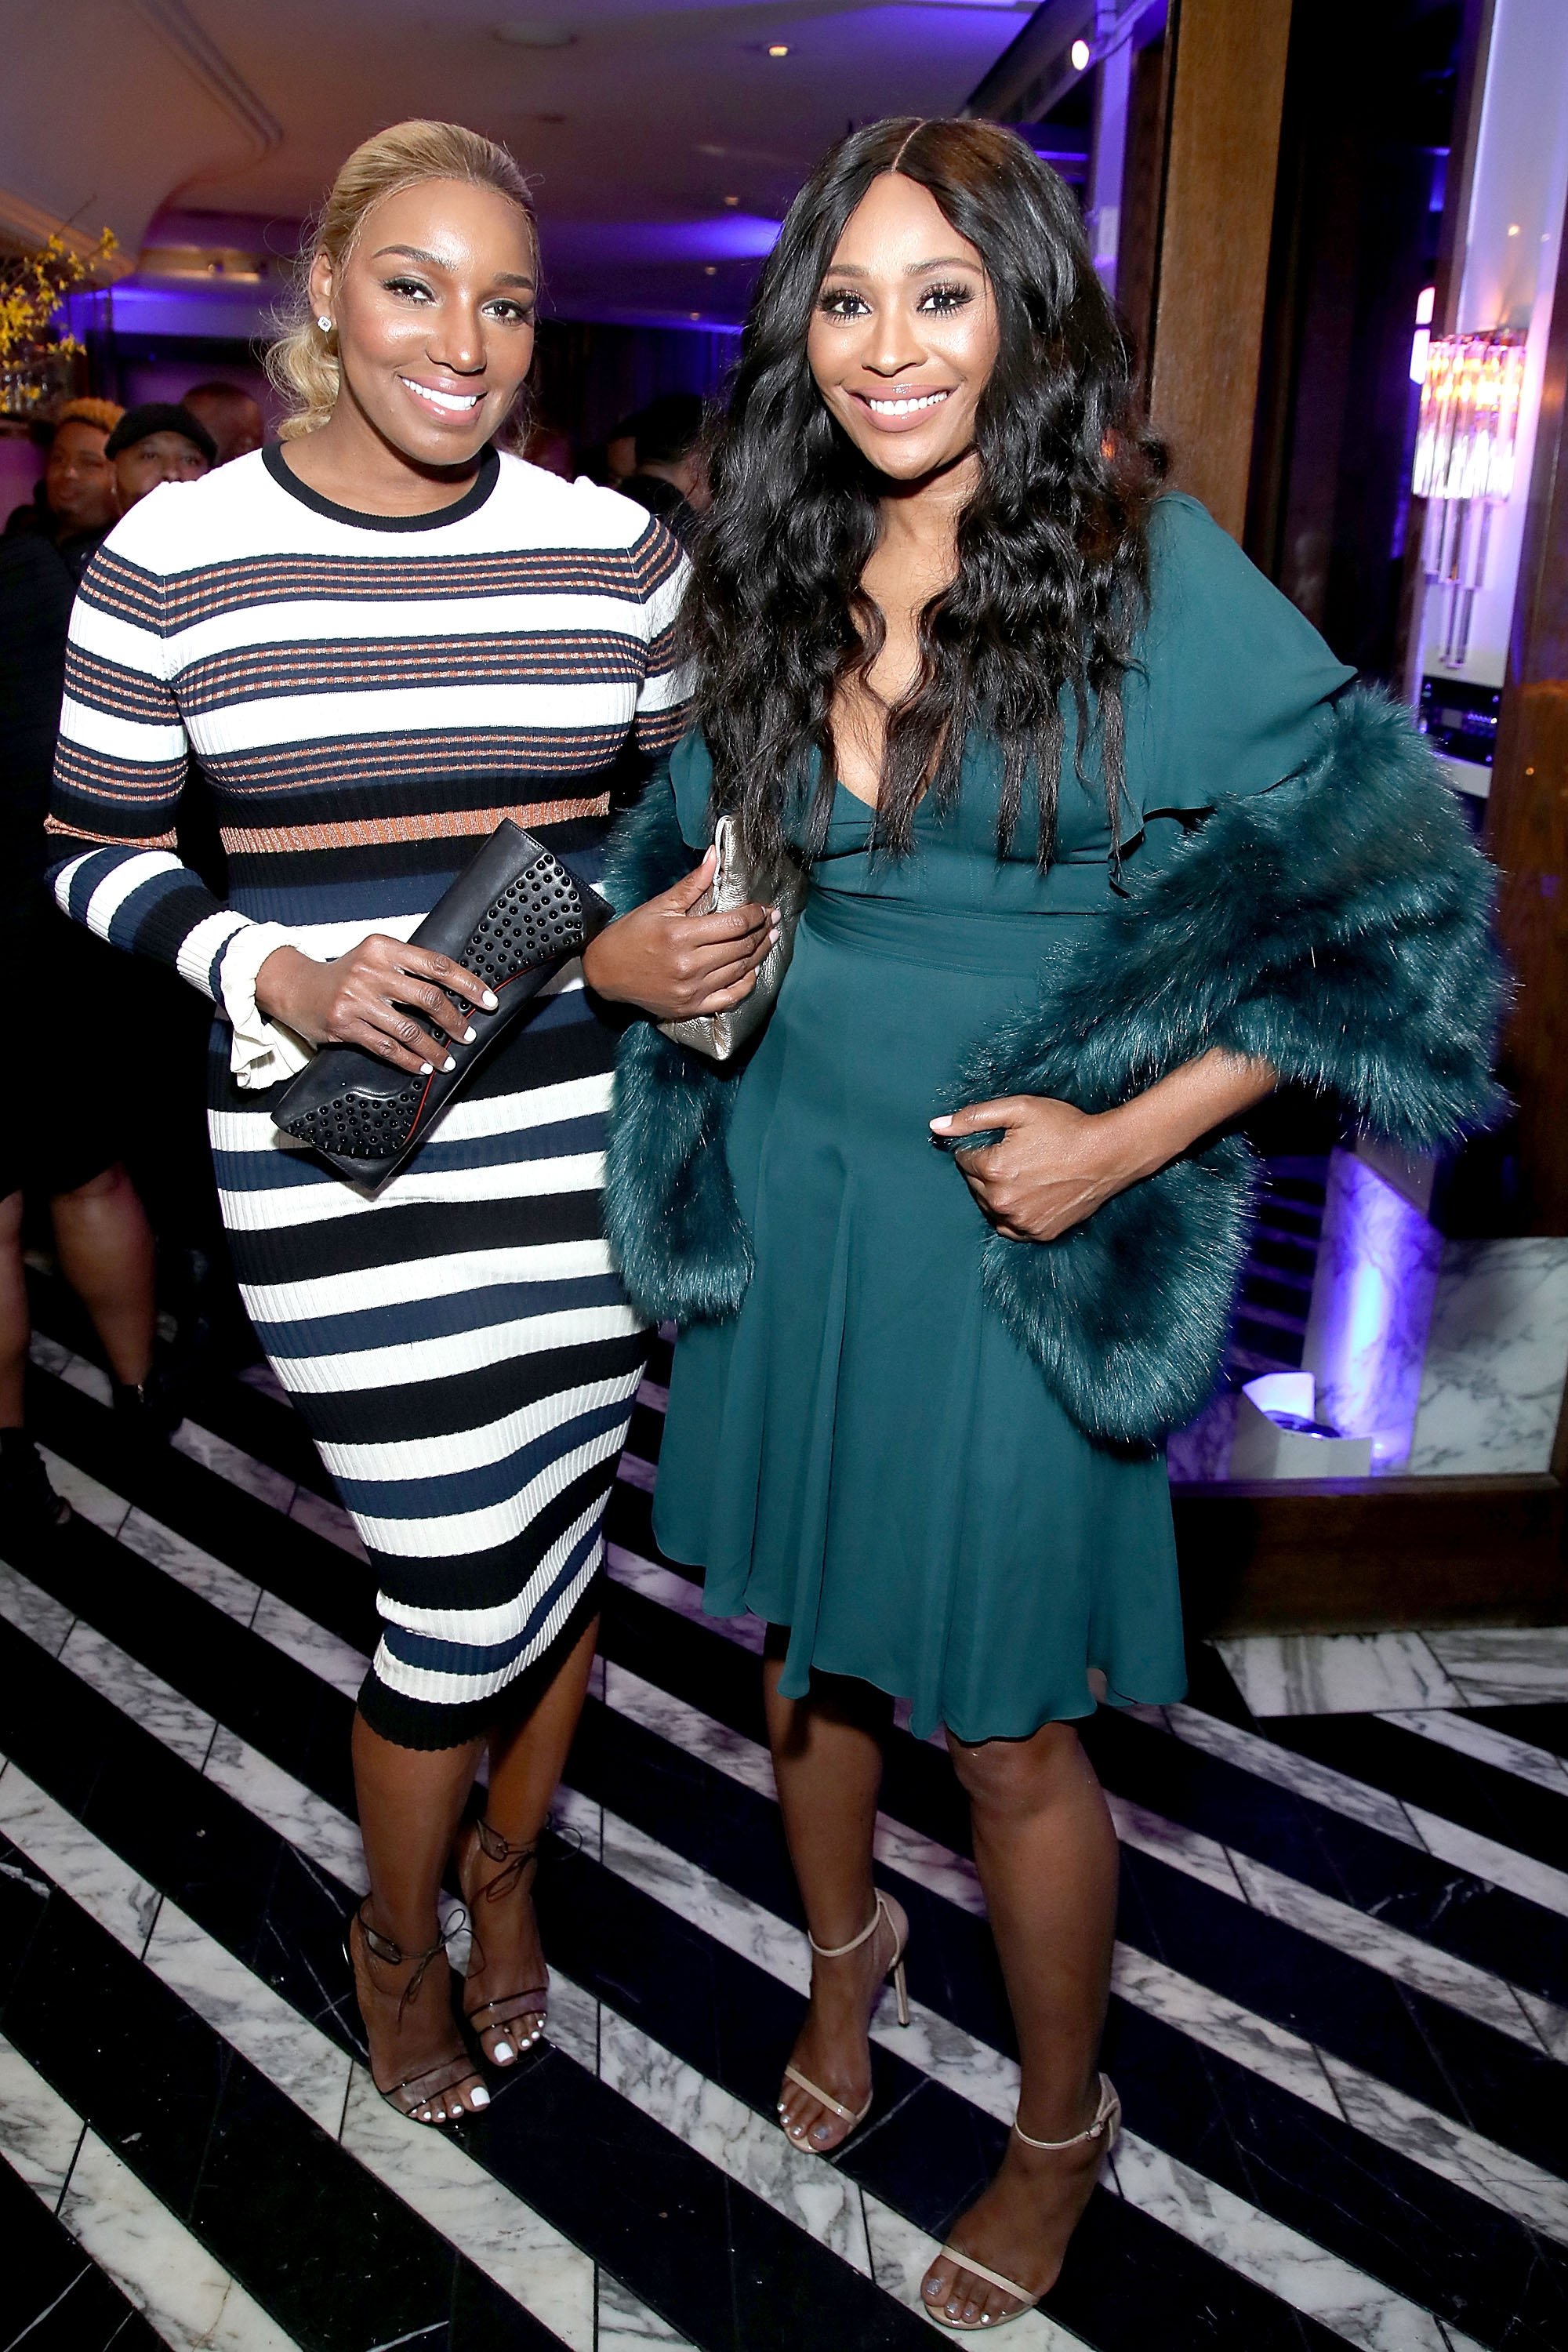 NeNe Leaks and Cynthia Bailey attend Pre ABFF Honors Cocktail Party on February 16, 2017 | Photo: GettyImages